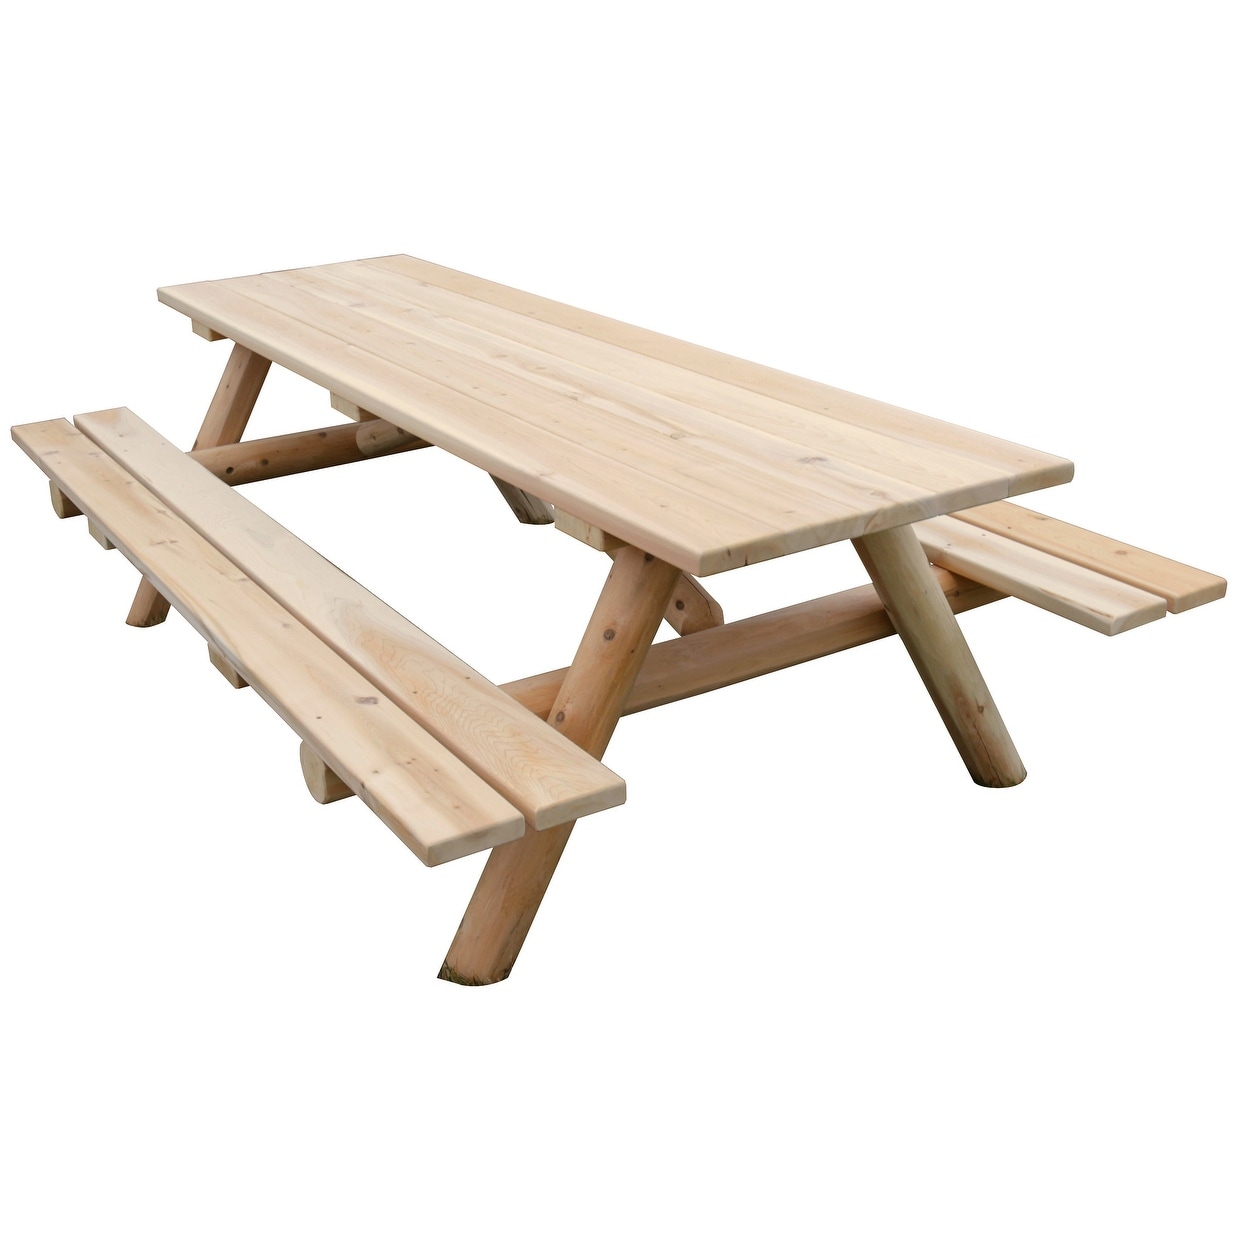 Outdoor White Cedar Log 8 Picnic Table With Attached Benches